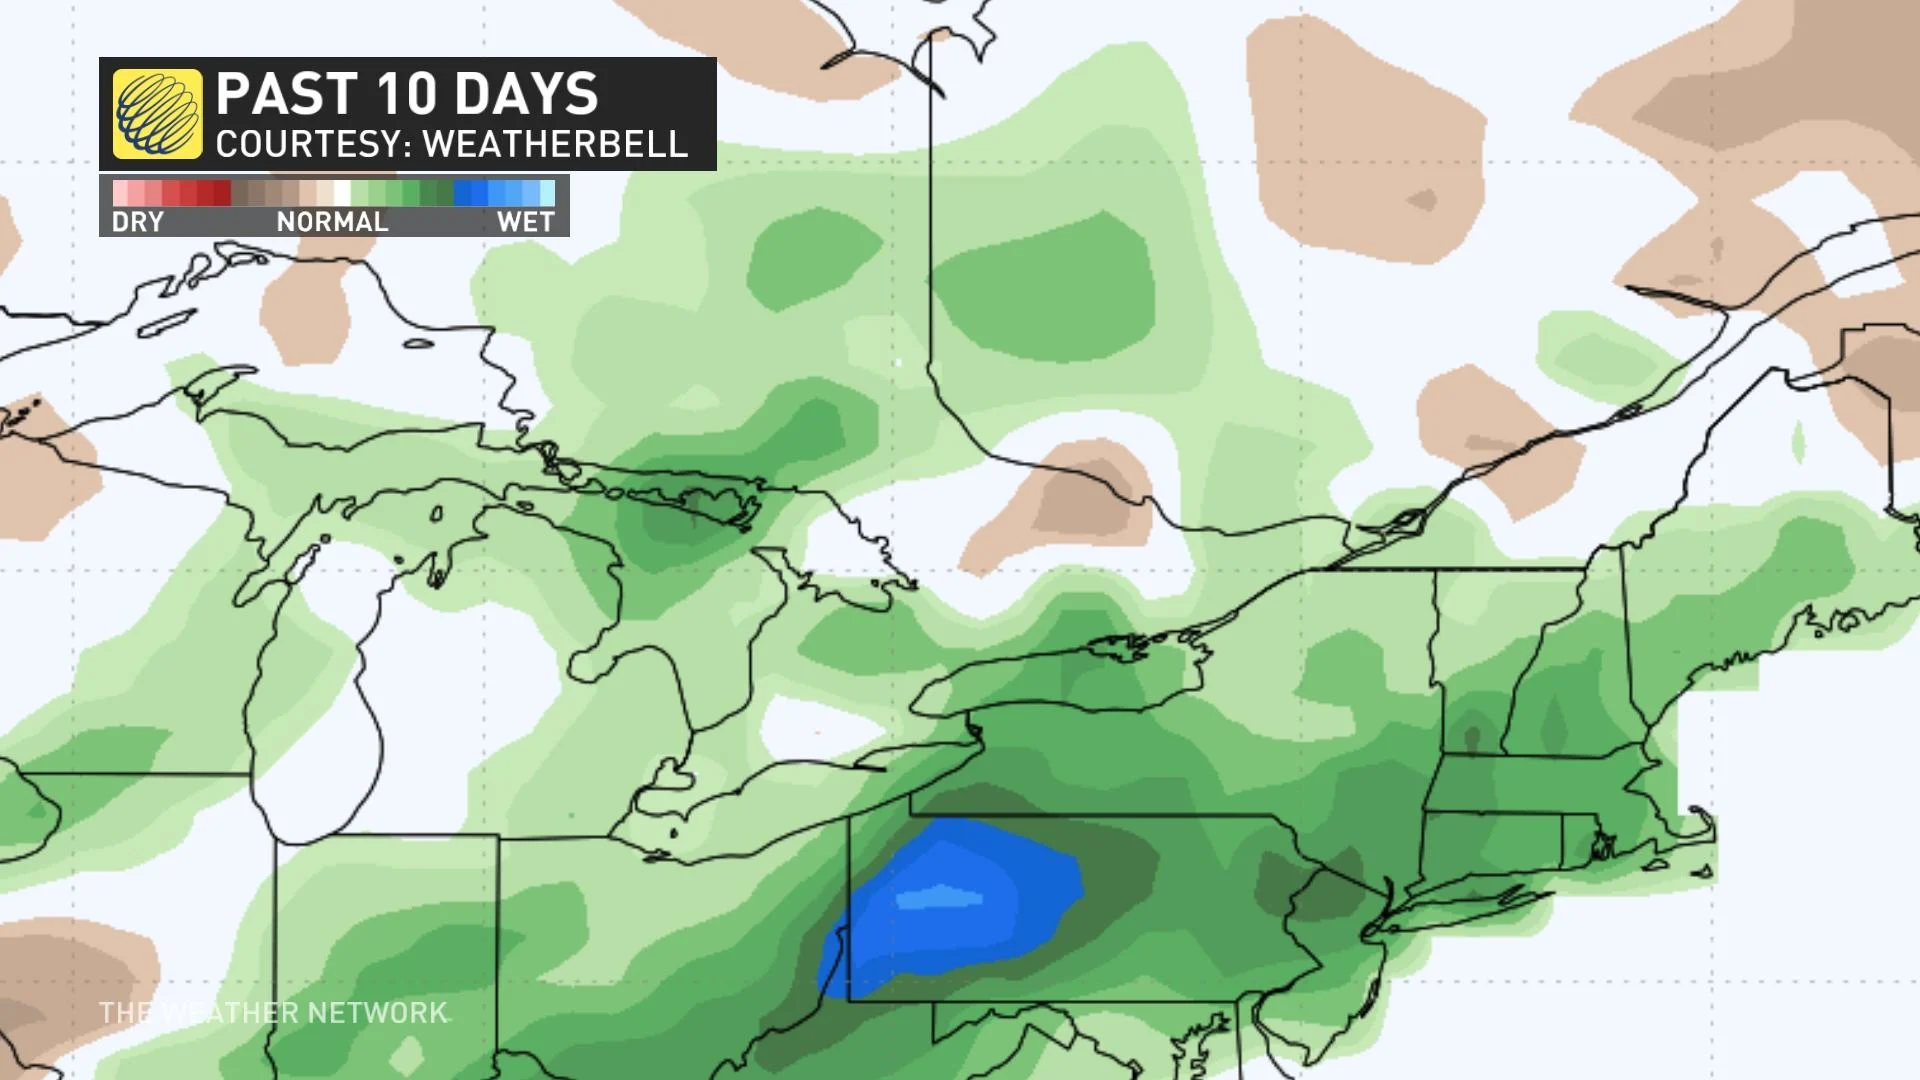 Ontario precipitation anomaly in past 10 days [as of April 13]